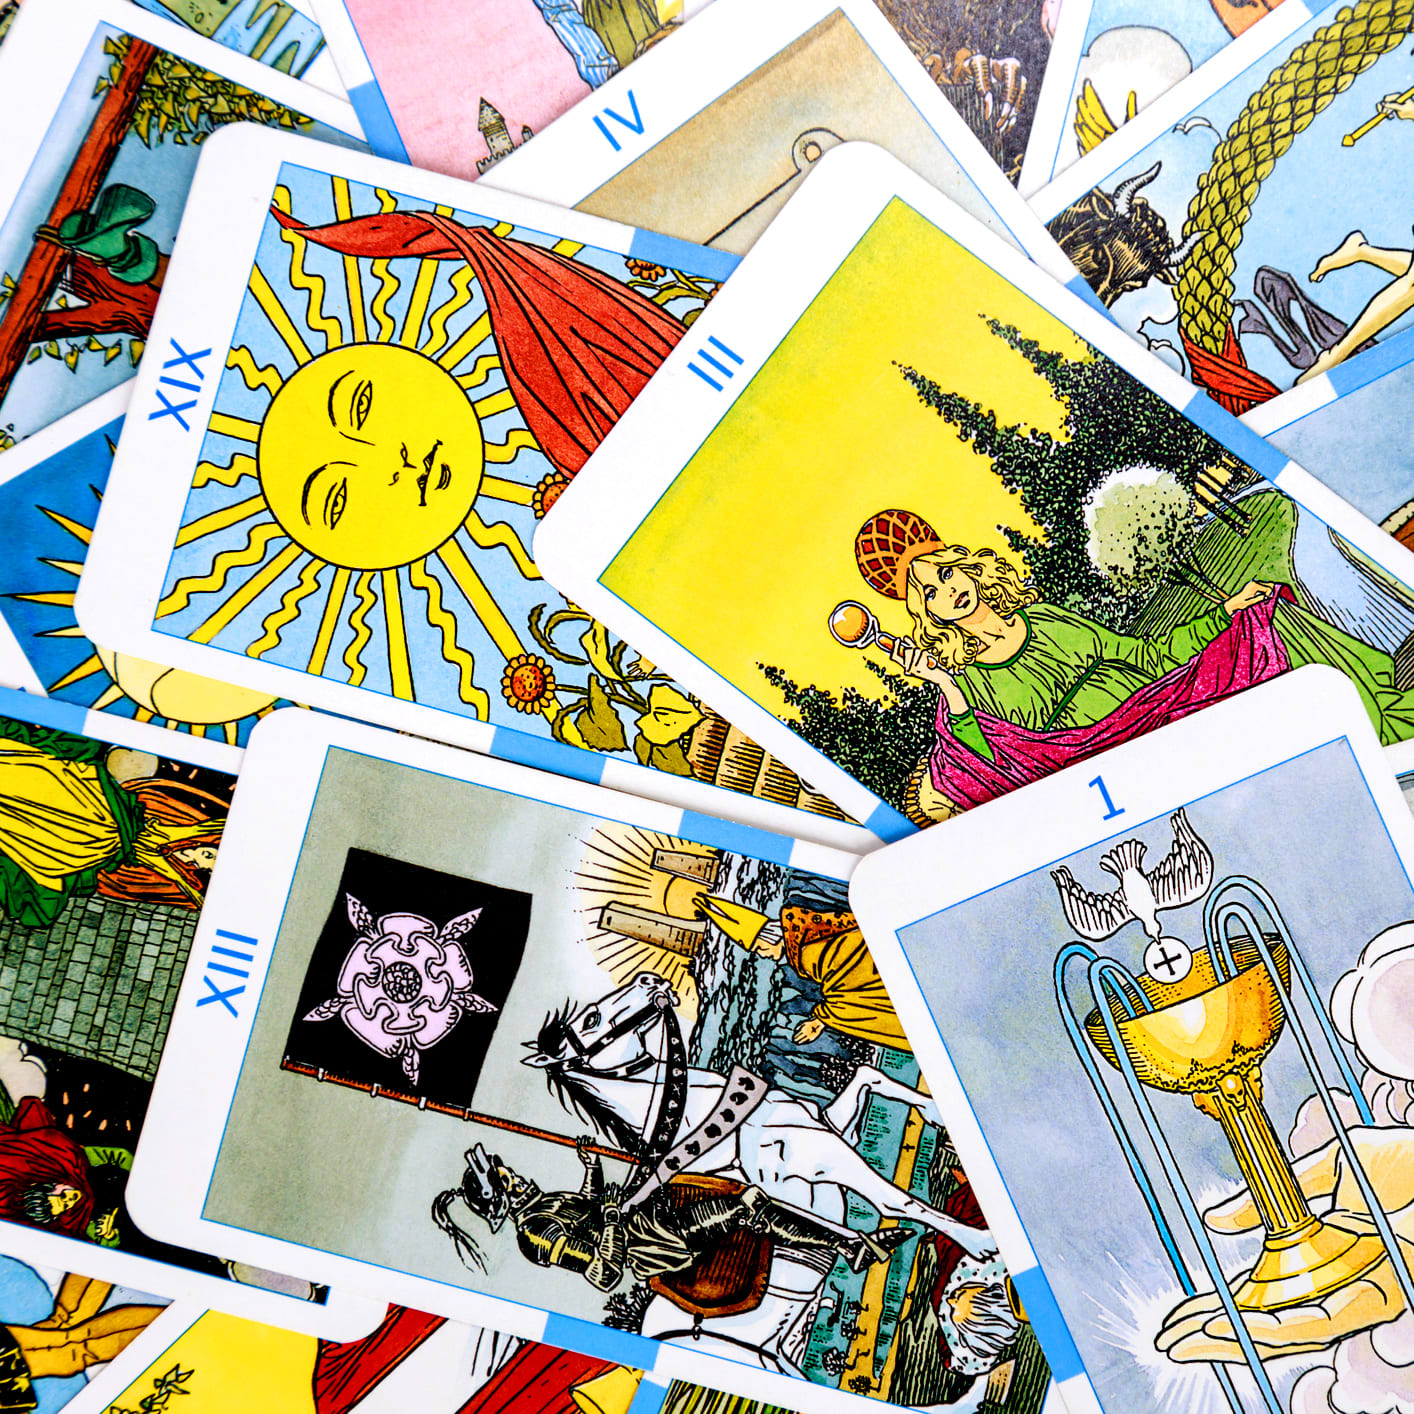 Uncovering The World Tarot Card Meaning